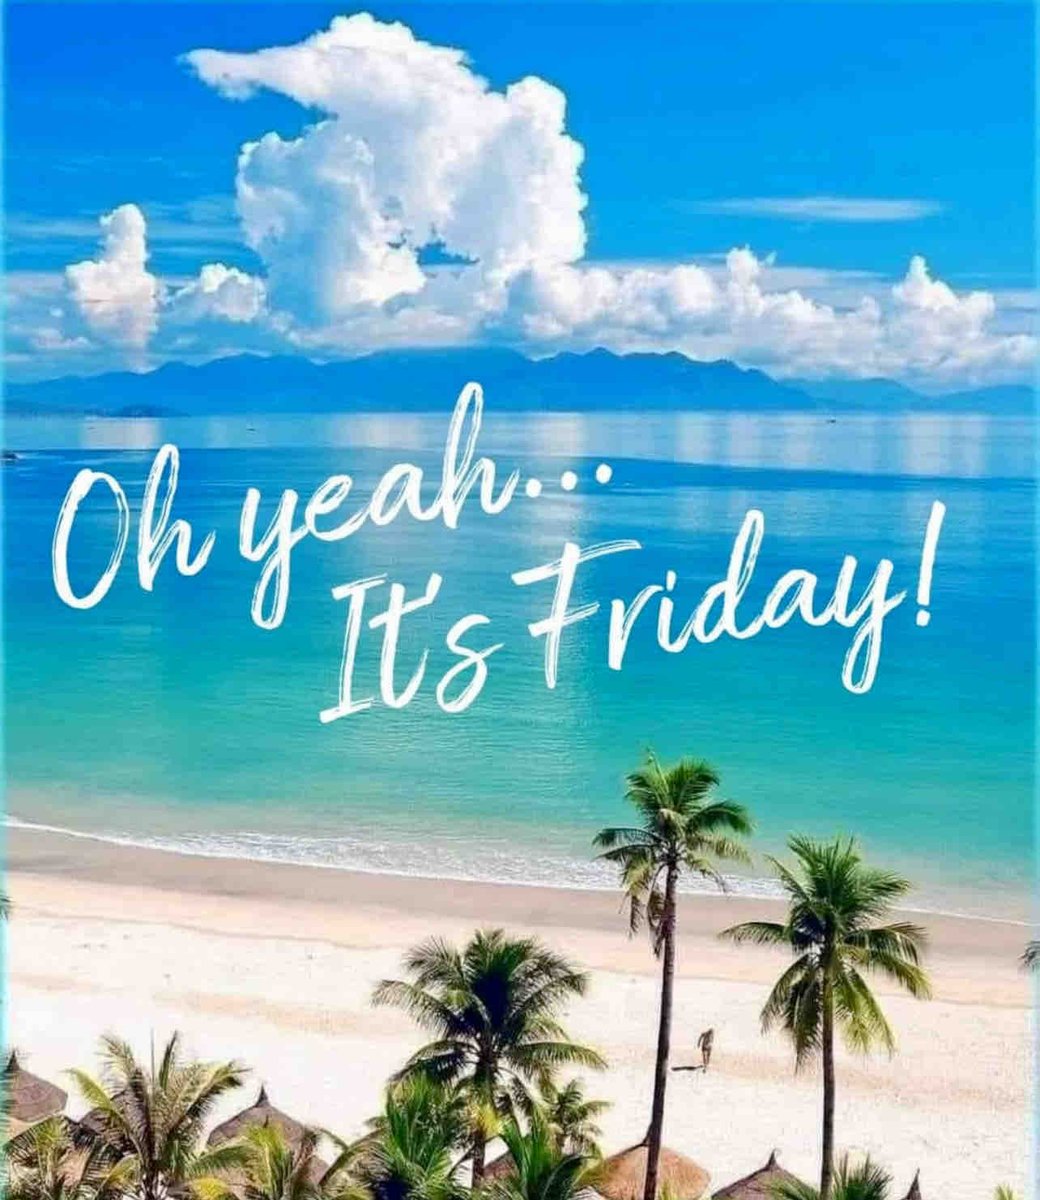 Cheers to Friday! Let the weekend therapy begin.

#worldimpact #weekendvibes #jasonrossrealestate #gulfshores #orangebeach